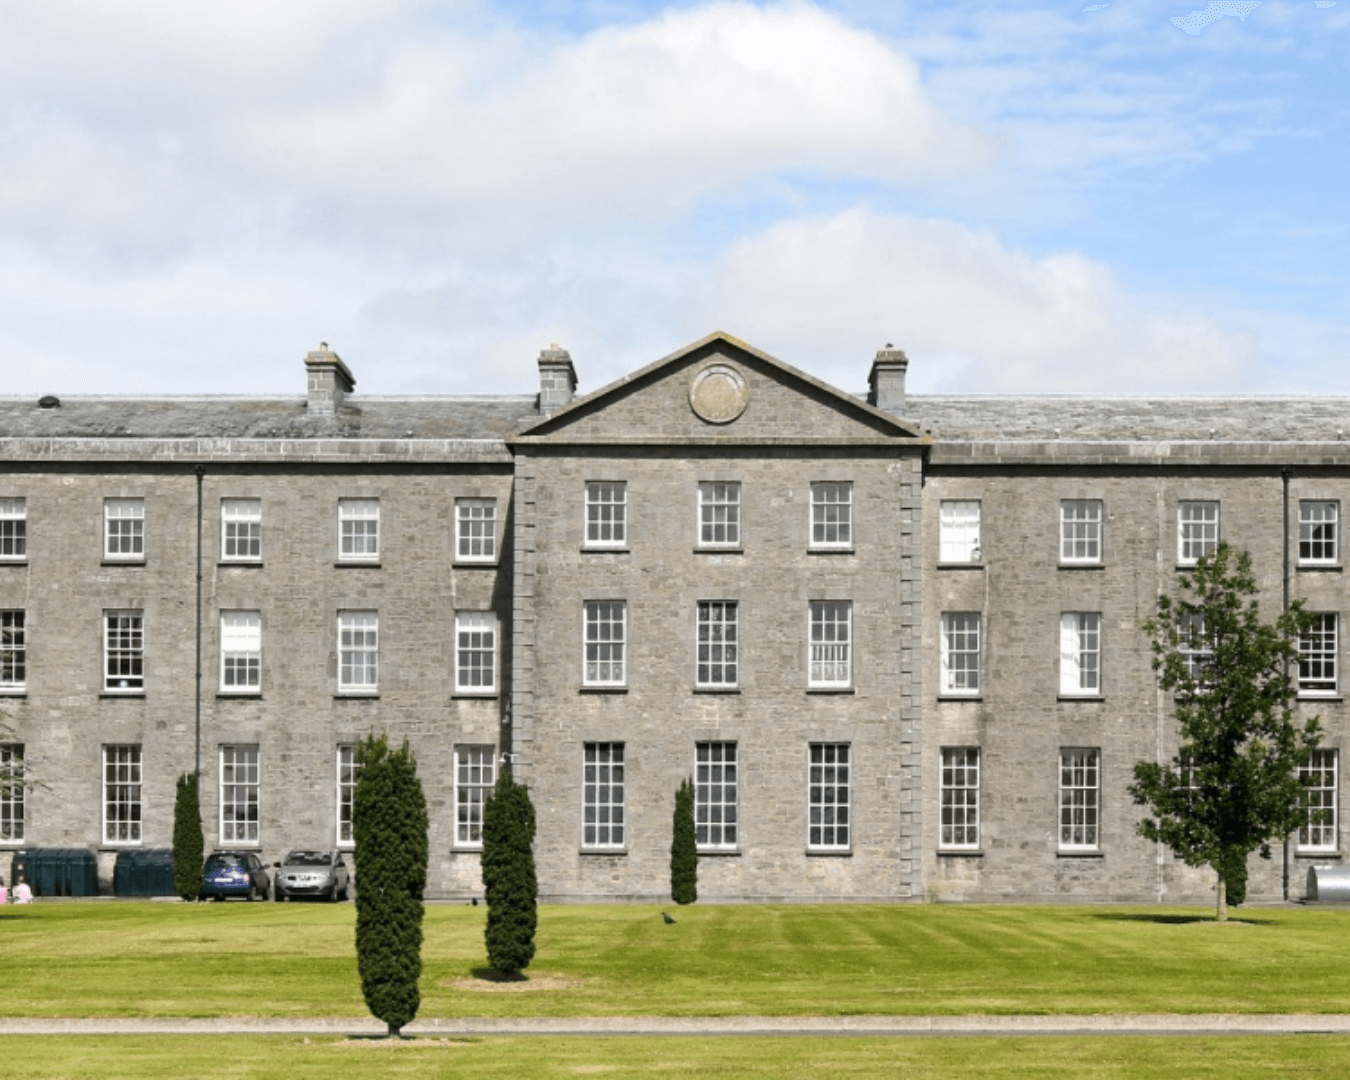 Ireland’s Mary Immaculate College Selects YuJa Enterprise Video Platform to Serve Two Campuses With Video Content Management Solution